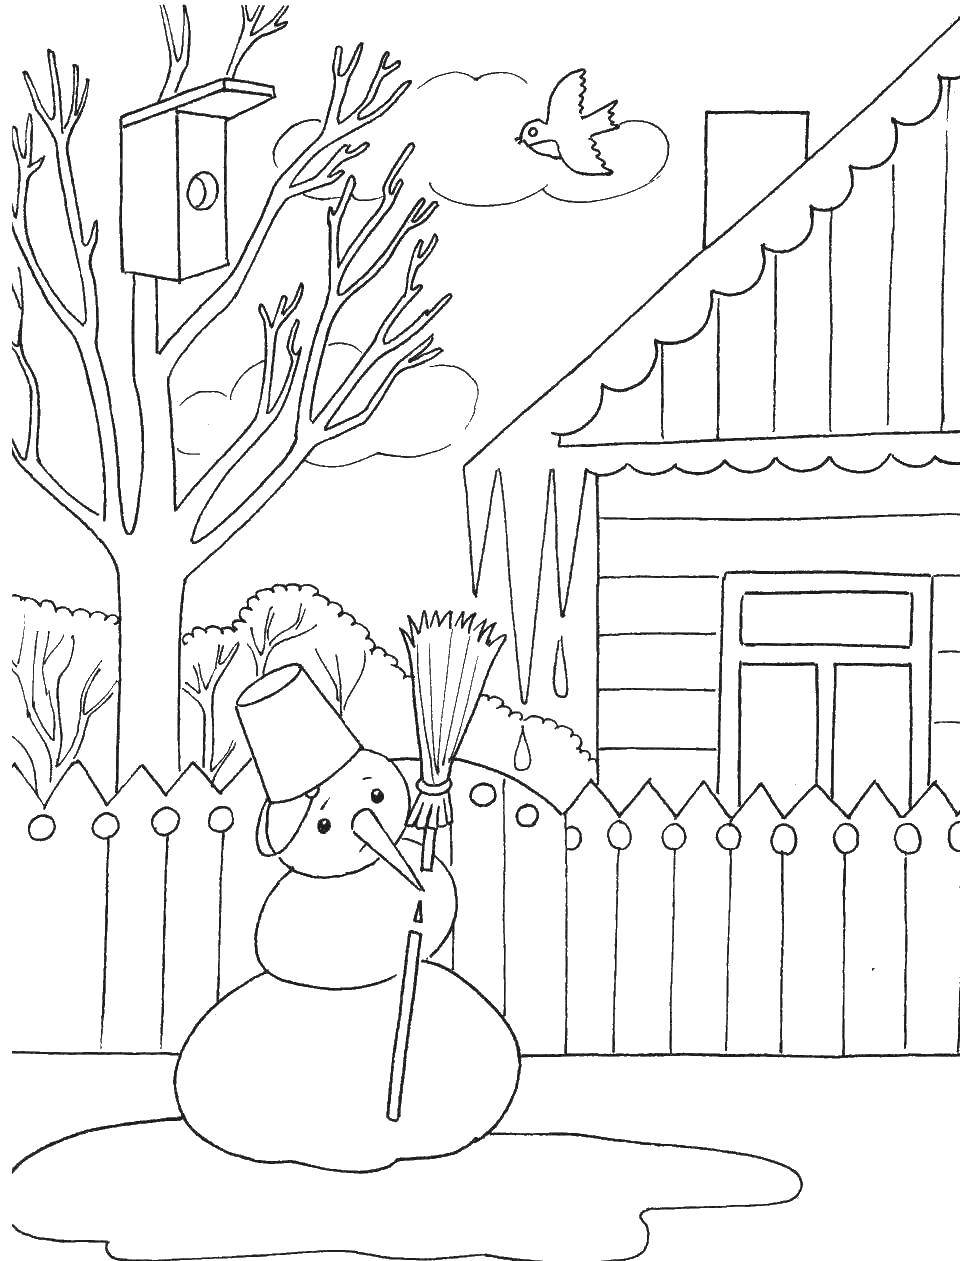 Coloring The snowman melts. Category snowman. Tags:  snowman, water, spring, house.